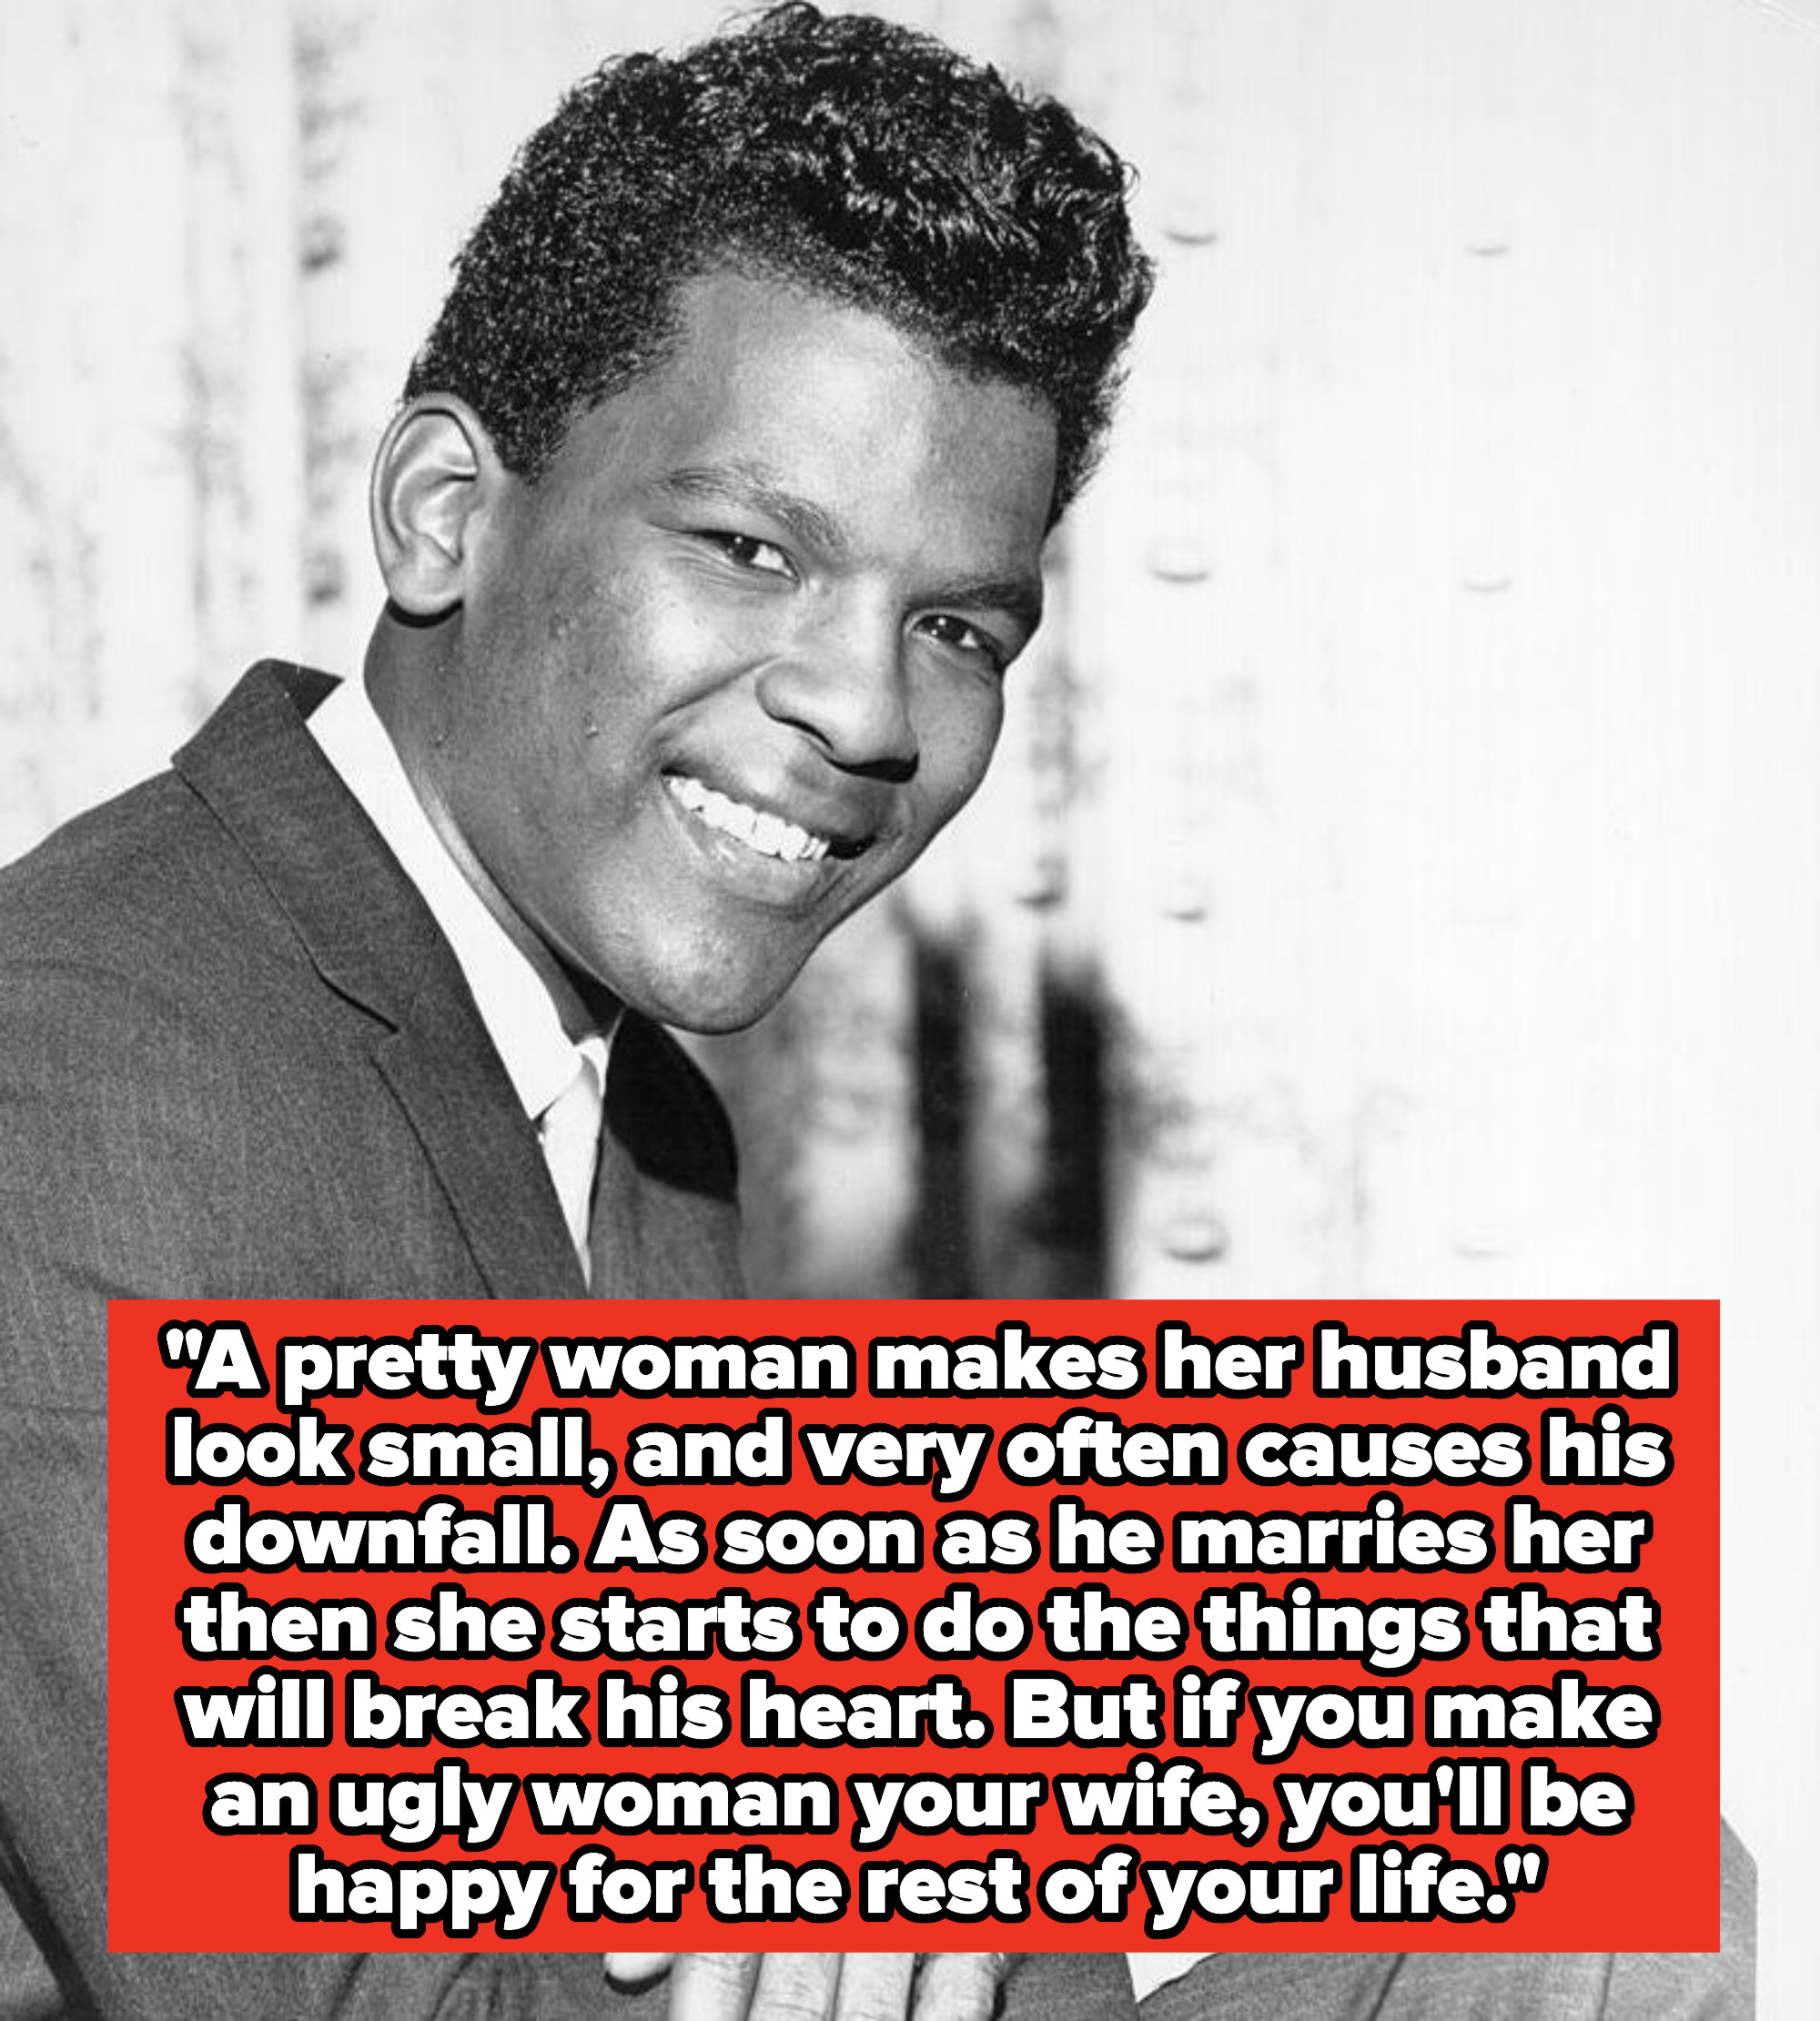 Jimmy Soul lyrics: &quot;A pretty woman makes her husband look small, and very often causes his downfall. As soon as he marries her then she starts to do the things that will break his heart&quot;